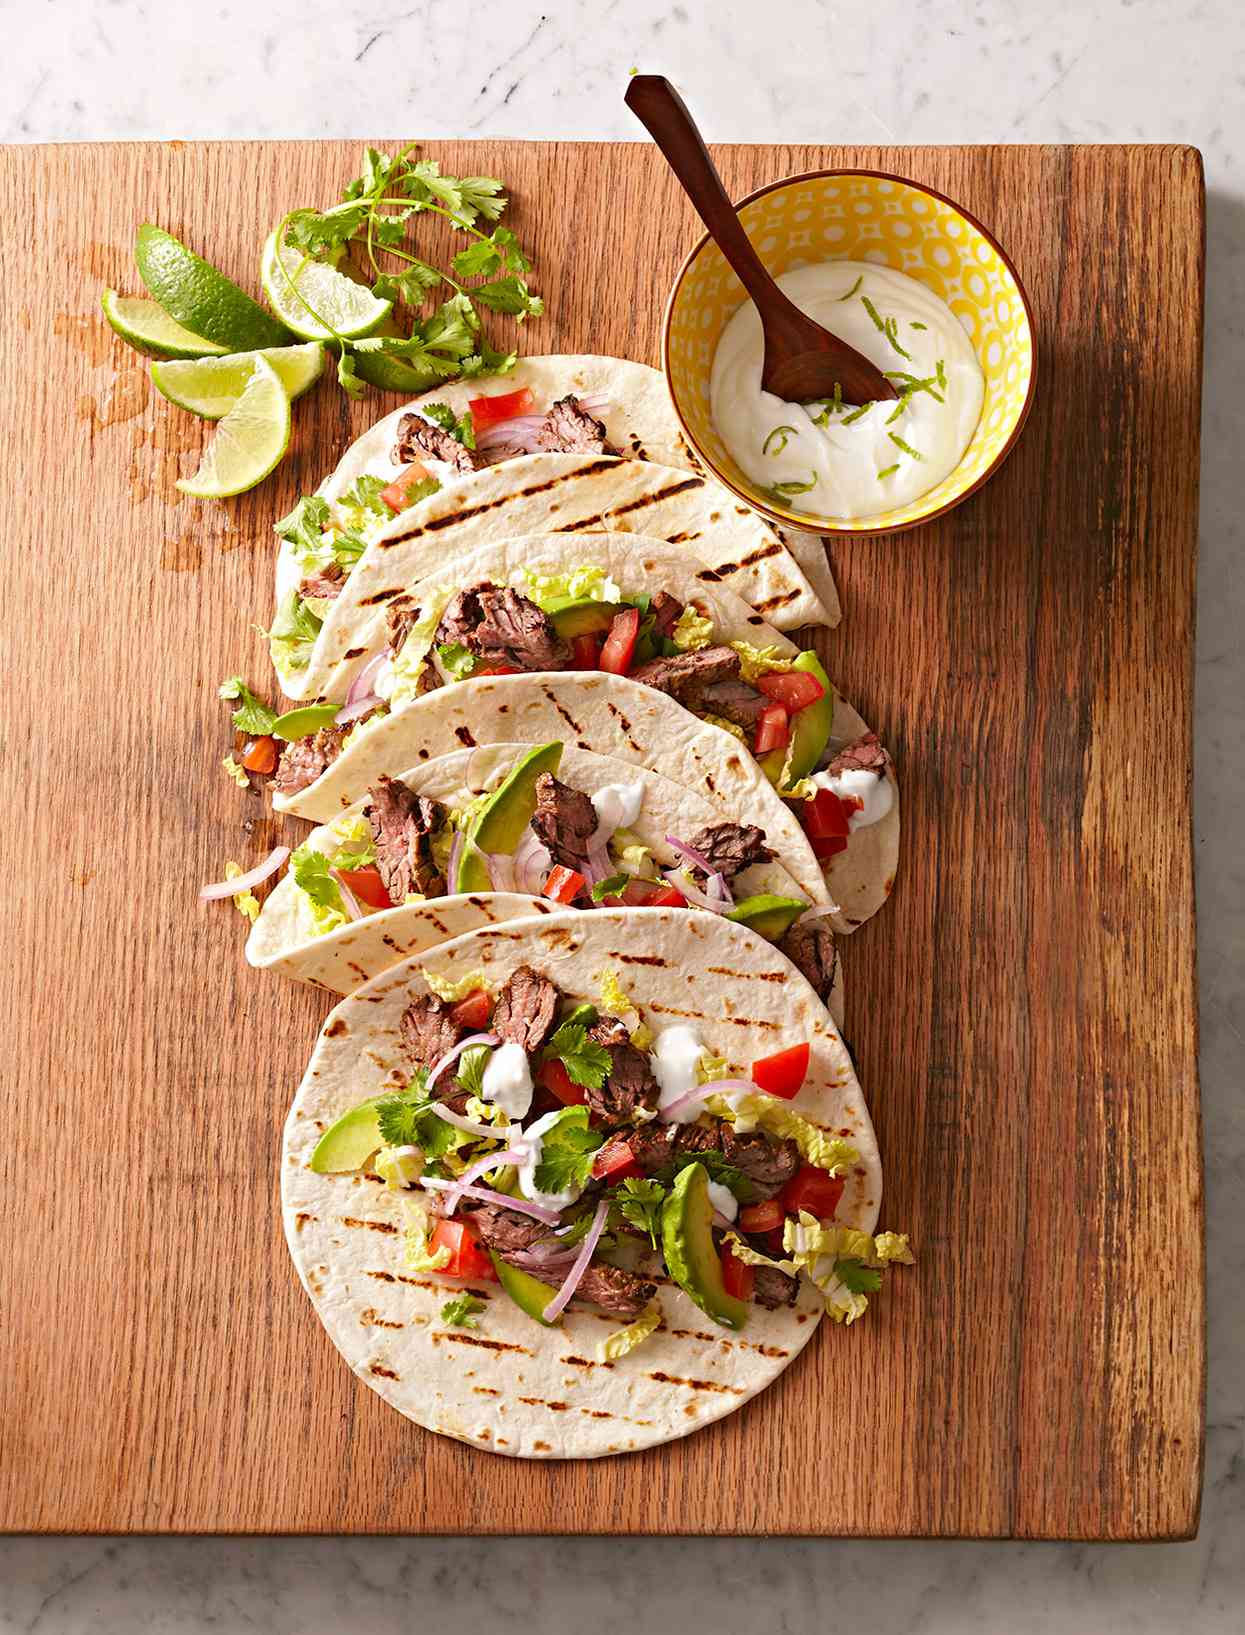 Skirt Steak Tacos with Guacamole and Lime Crema